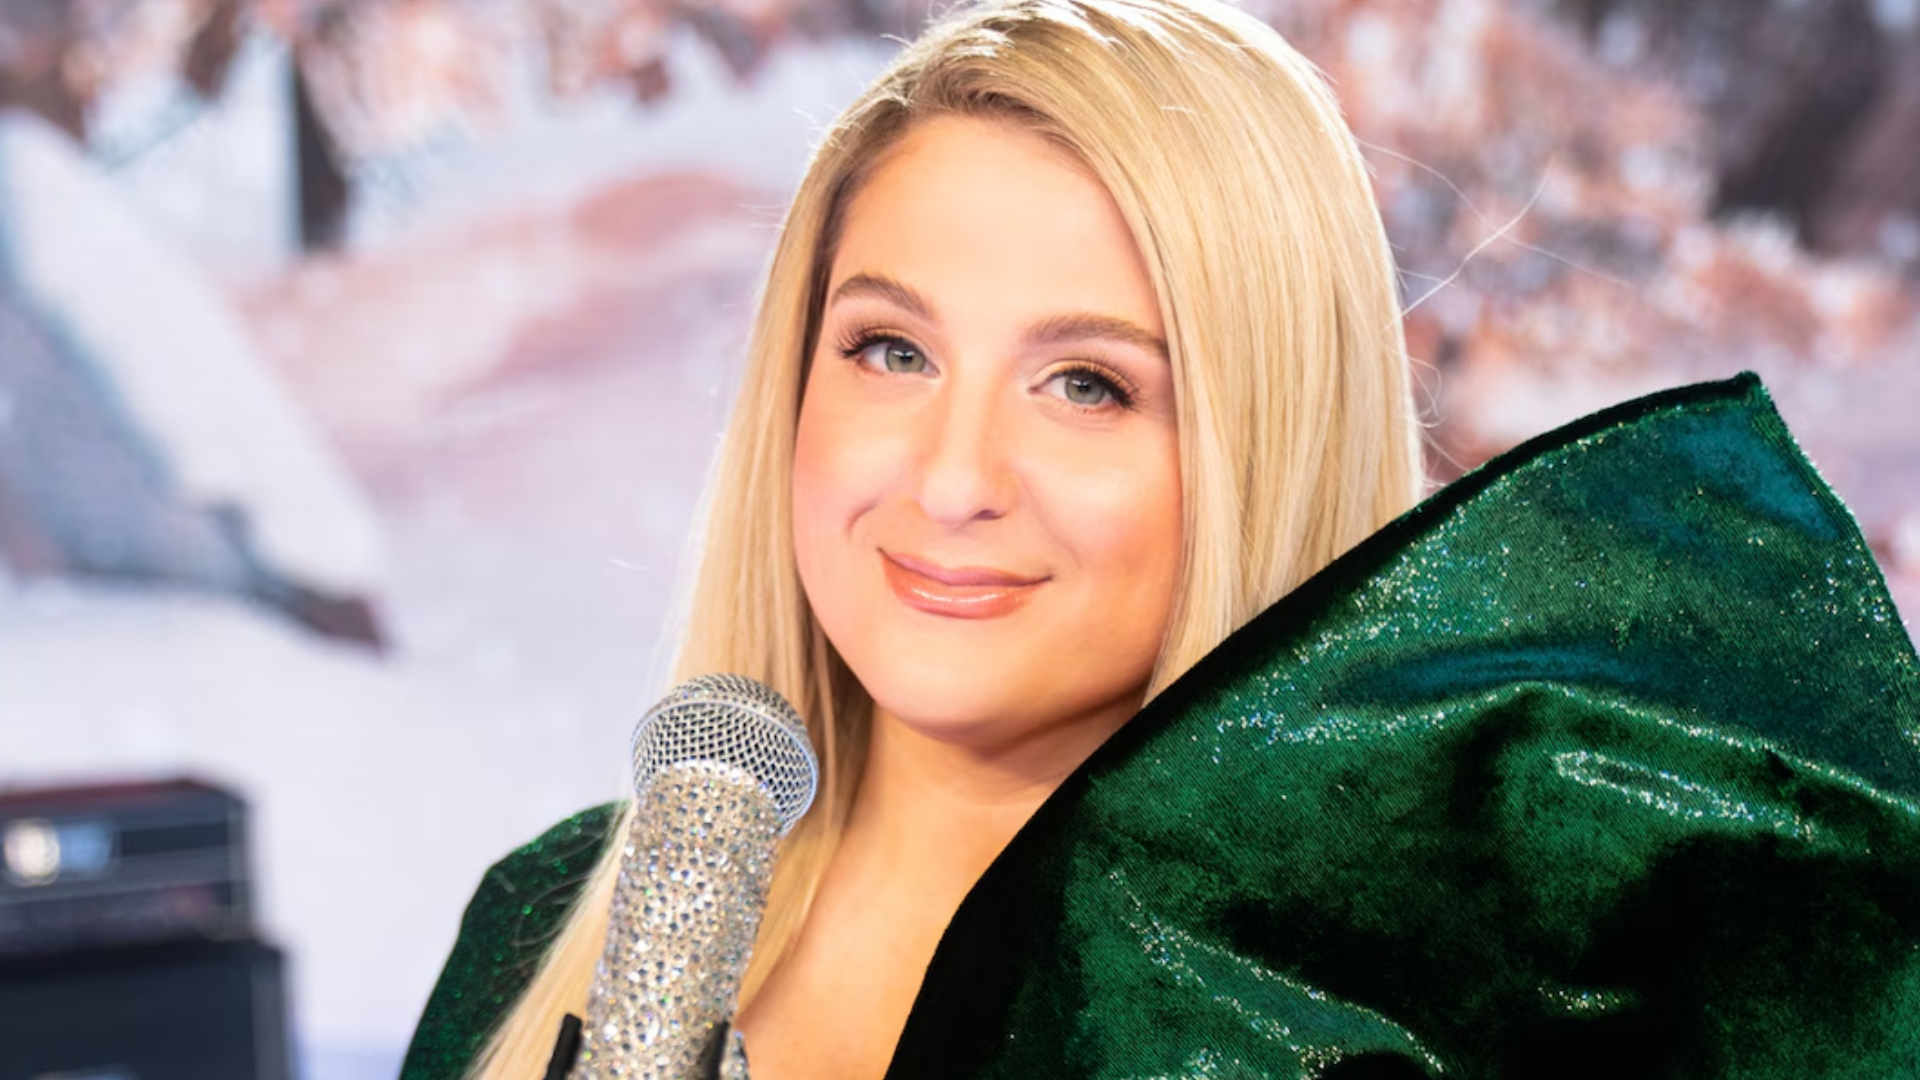 Meghan Trainor’s Dream Come True: Exciting New Role as an ‘American Idol’ Judge